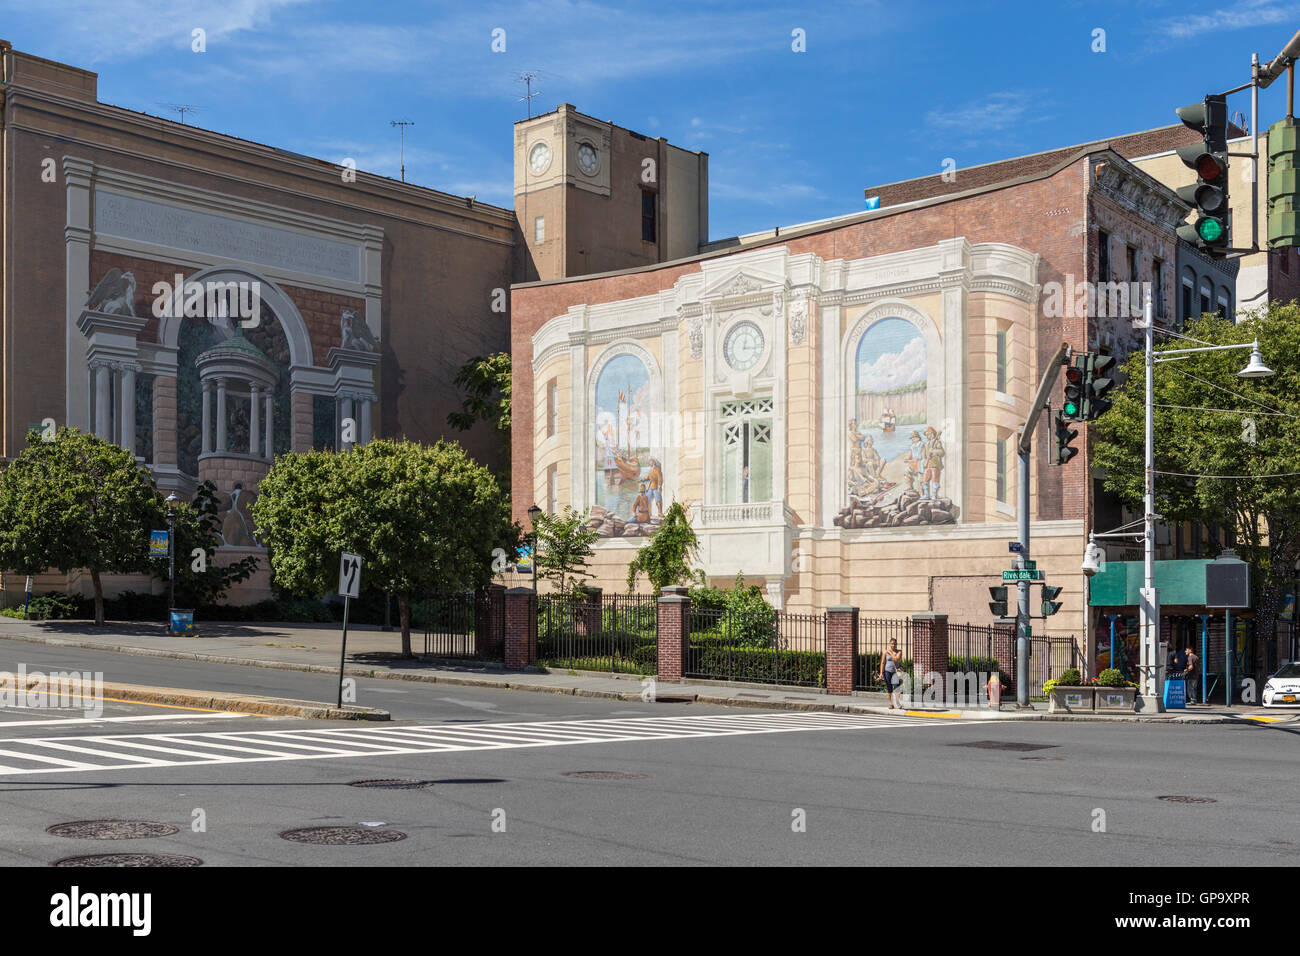 Two of the 'Gateway to Waterfront' murals on building walls in the Richard Haas Mural Historic District in Yonkers, New York. Stock Photo